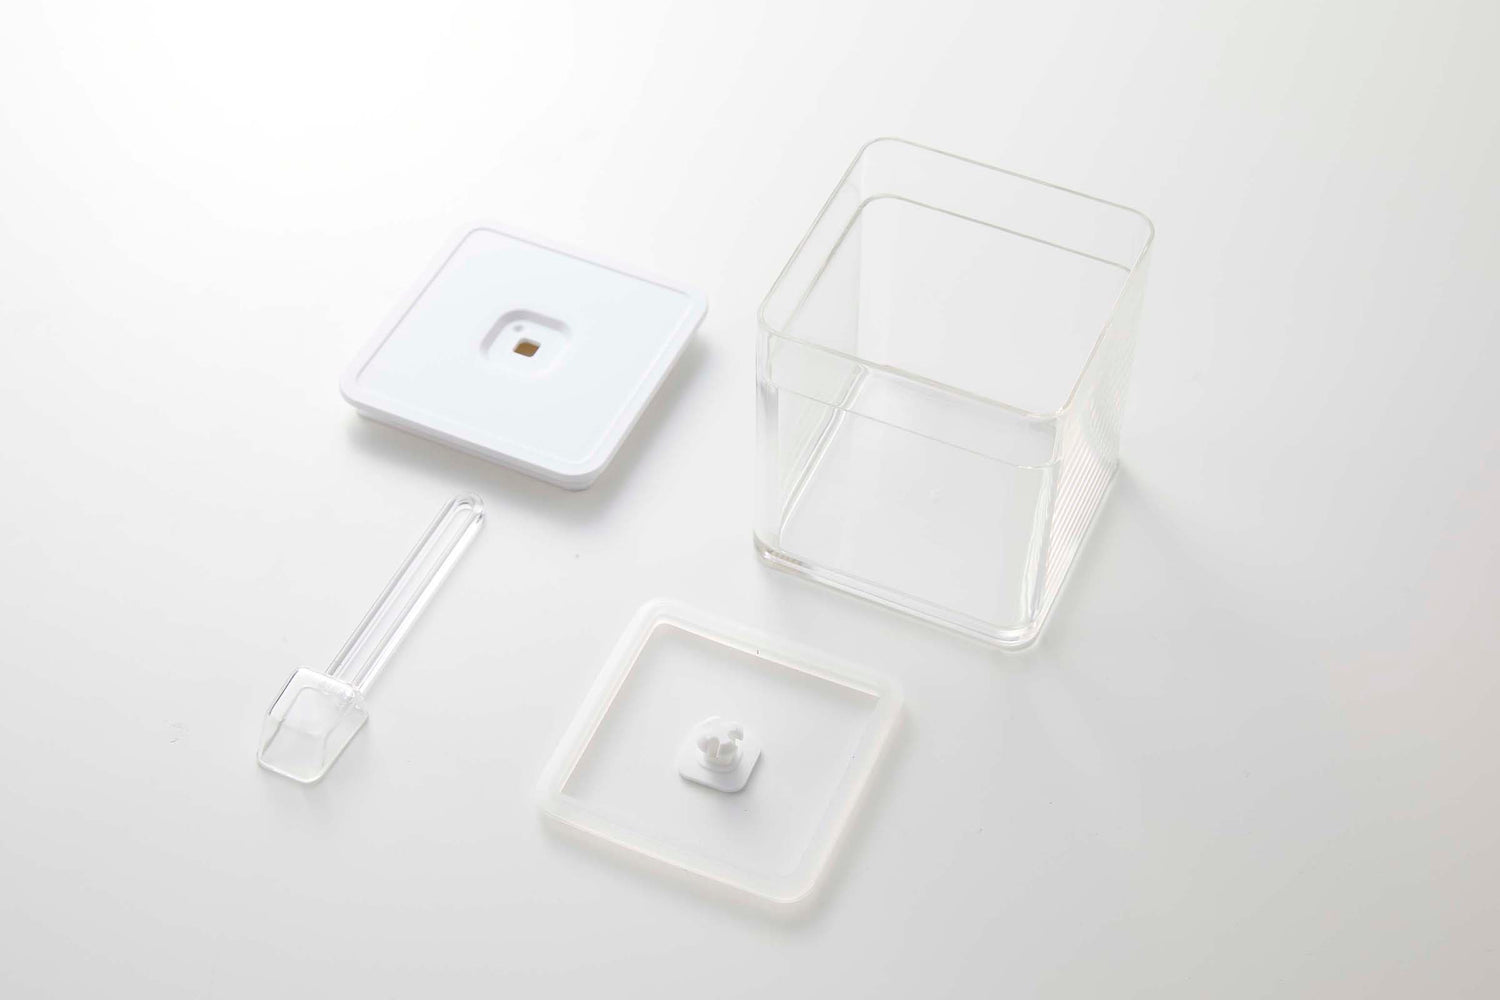 View 7 - Disassembled white Vacuum-Sealing Food Container w. Spoon on white background by Yamazaki Home.